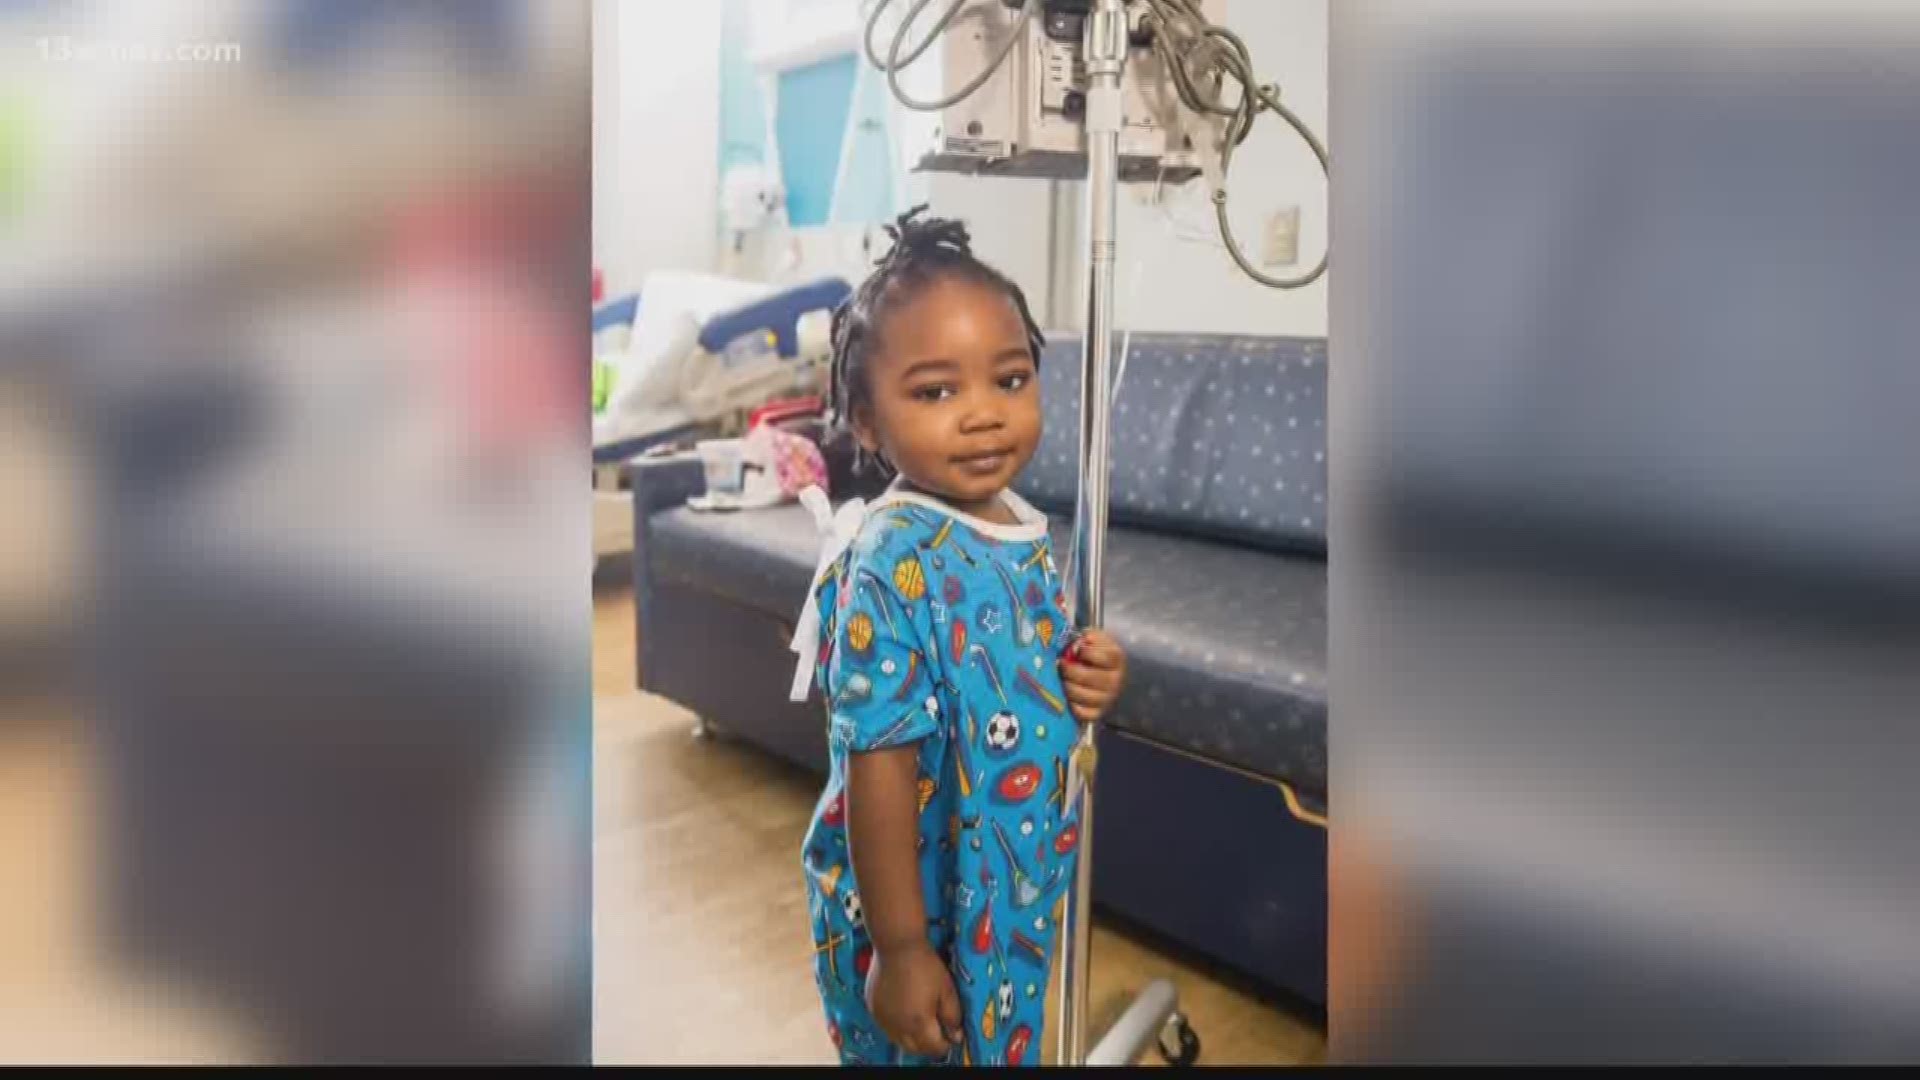 At only 2 years old, Keason has undergone four rounds of chemotherapy.